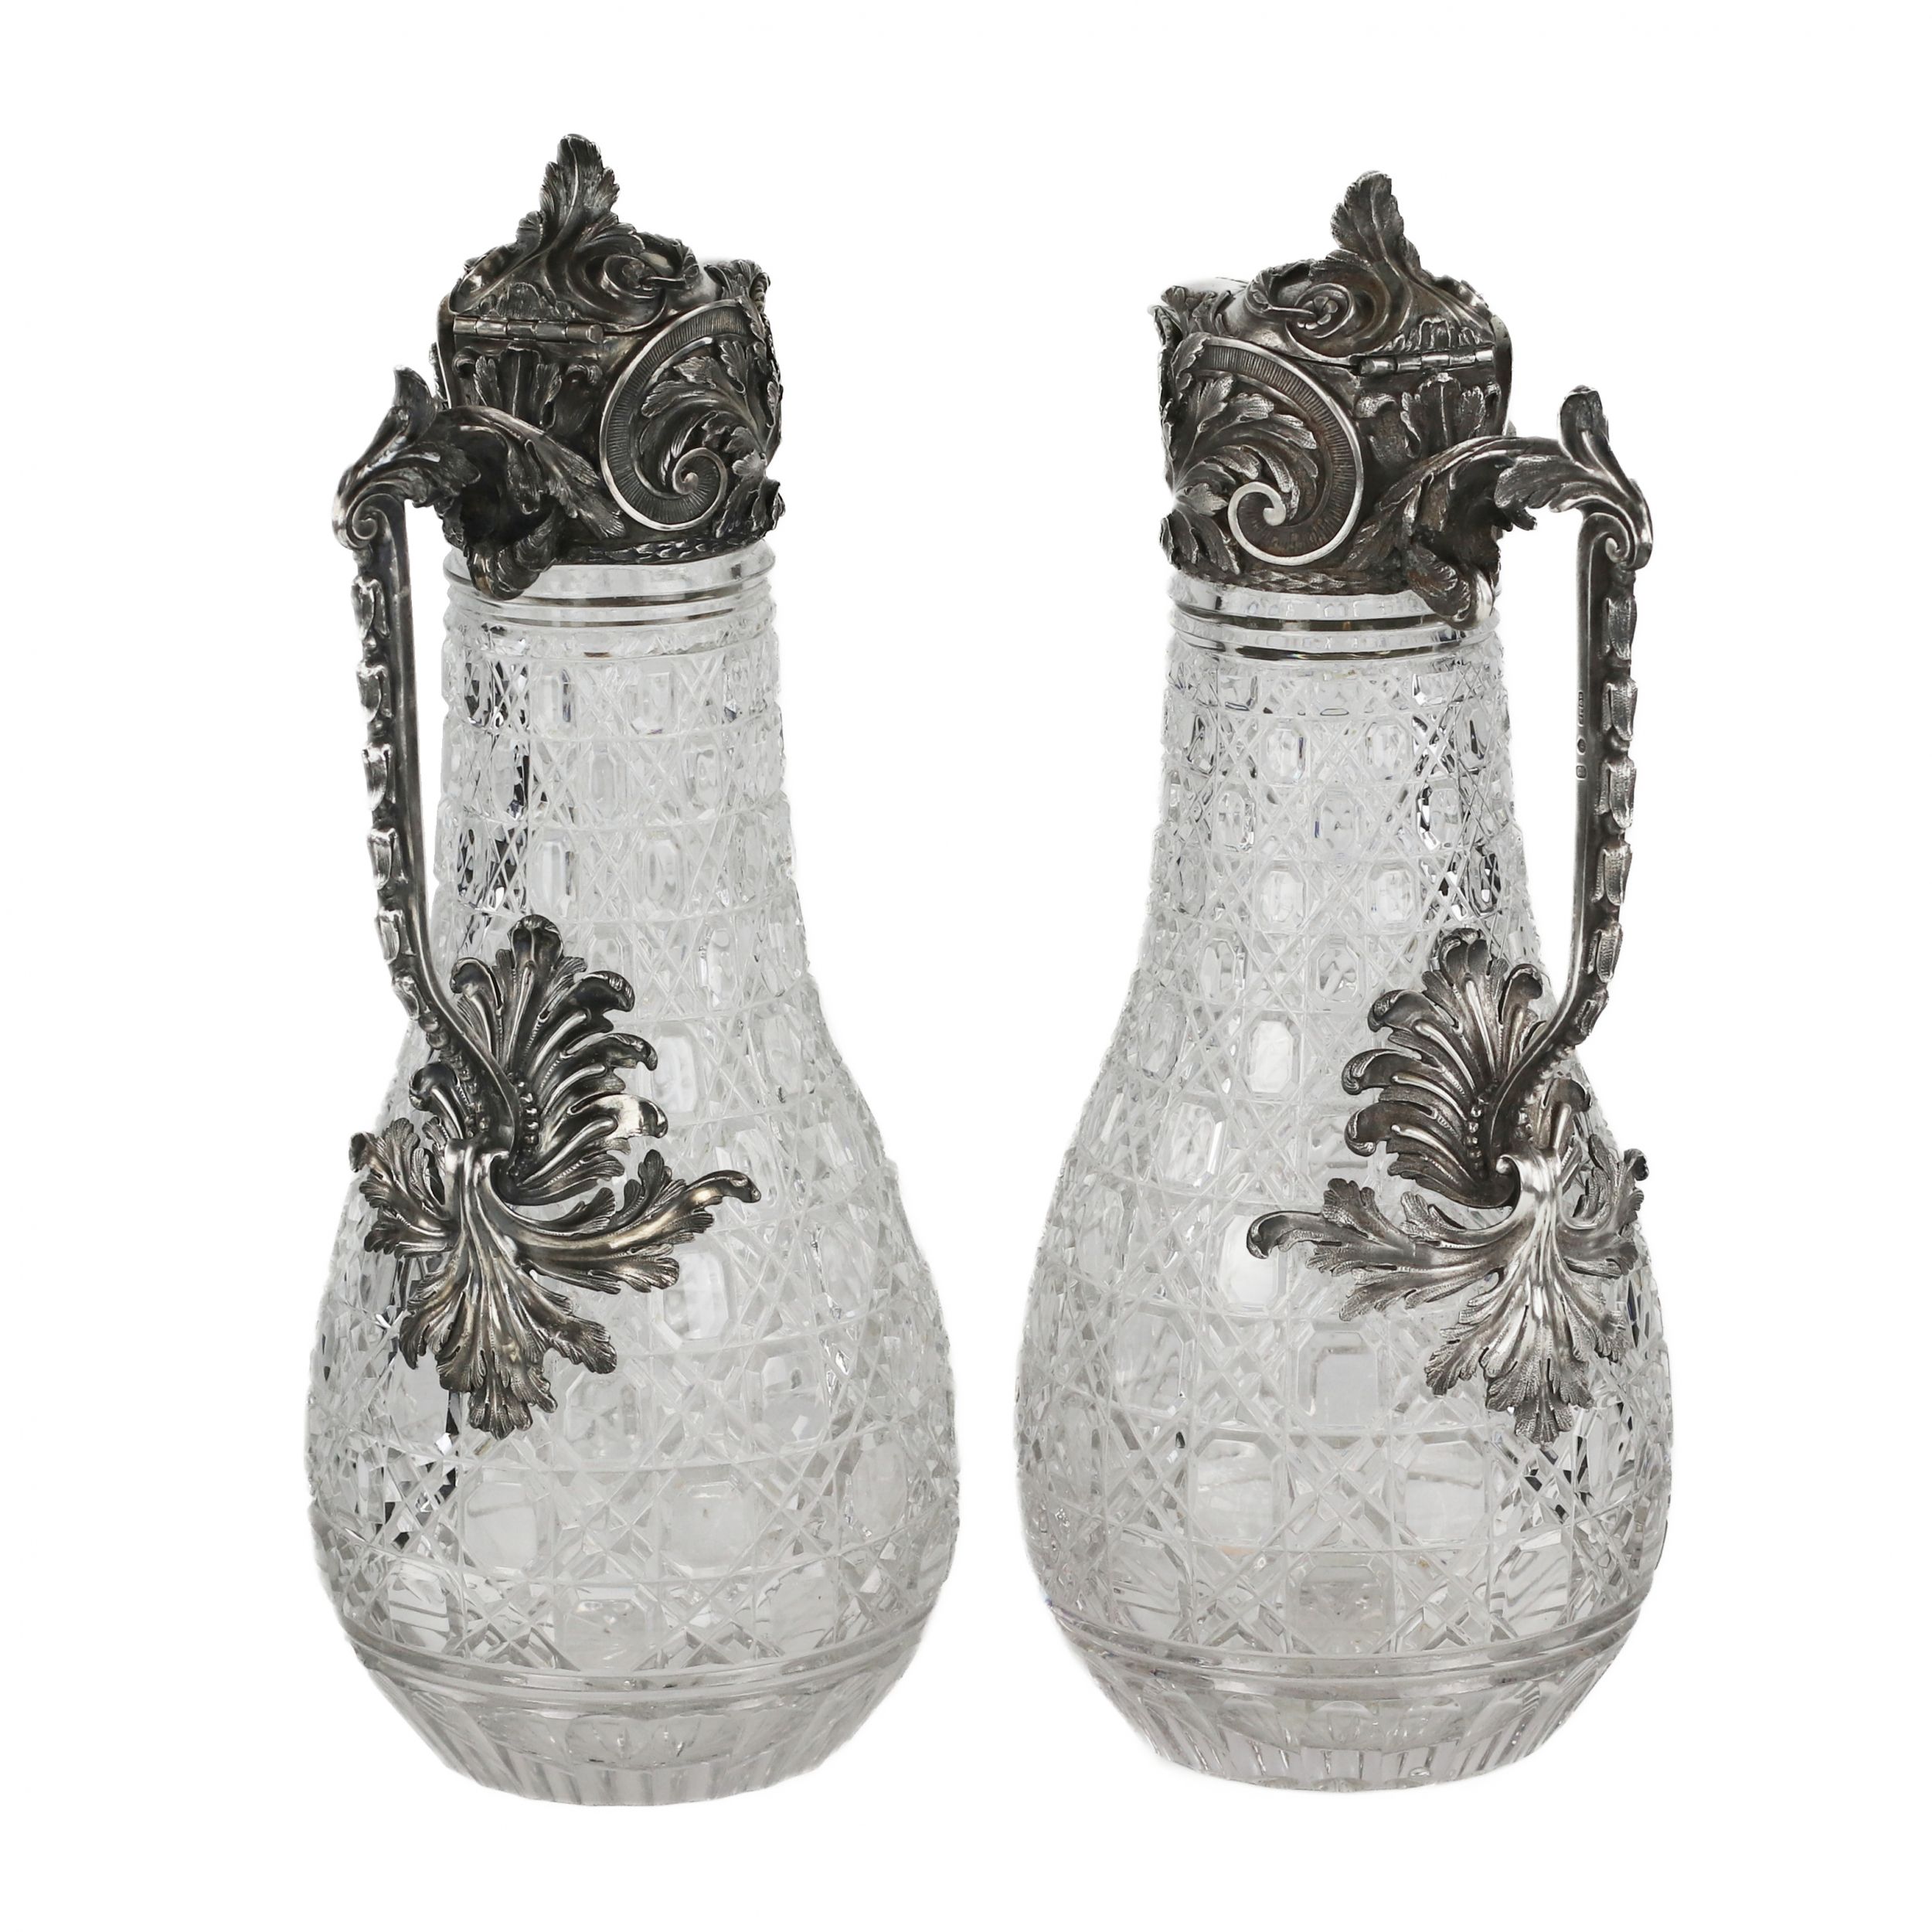 A magnificent pair of cast crystal wine jugs in superb BOLIN silver. Moscow. Russia 19th century. - Image 3 of 7